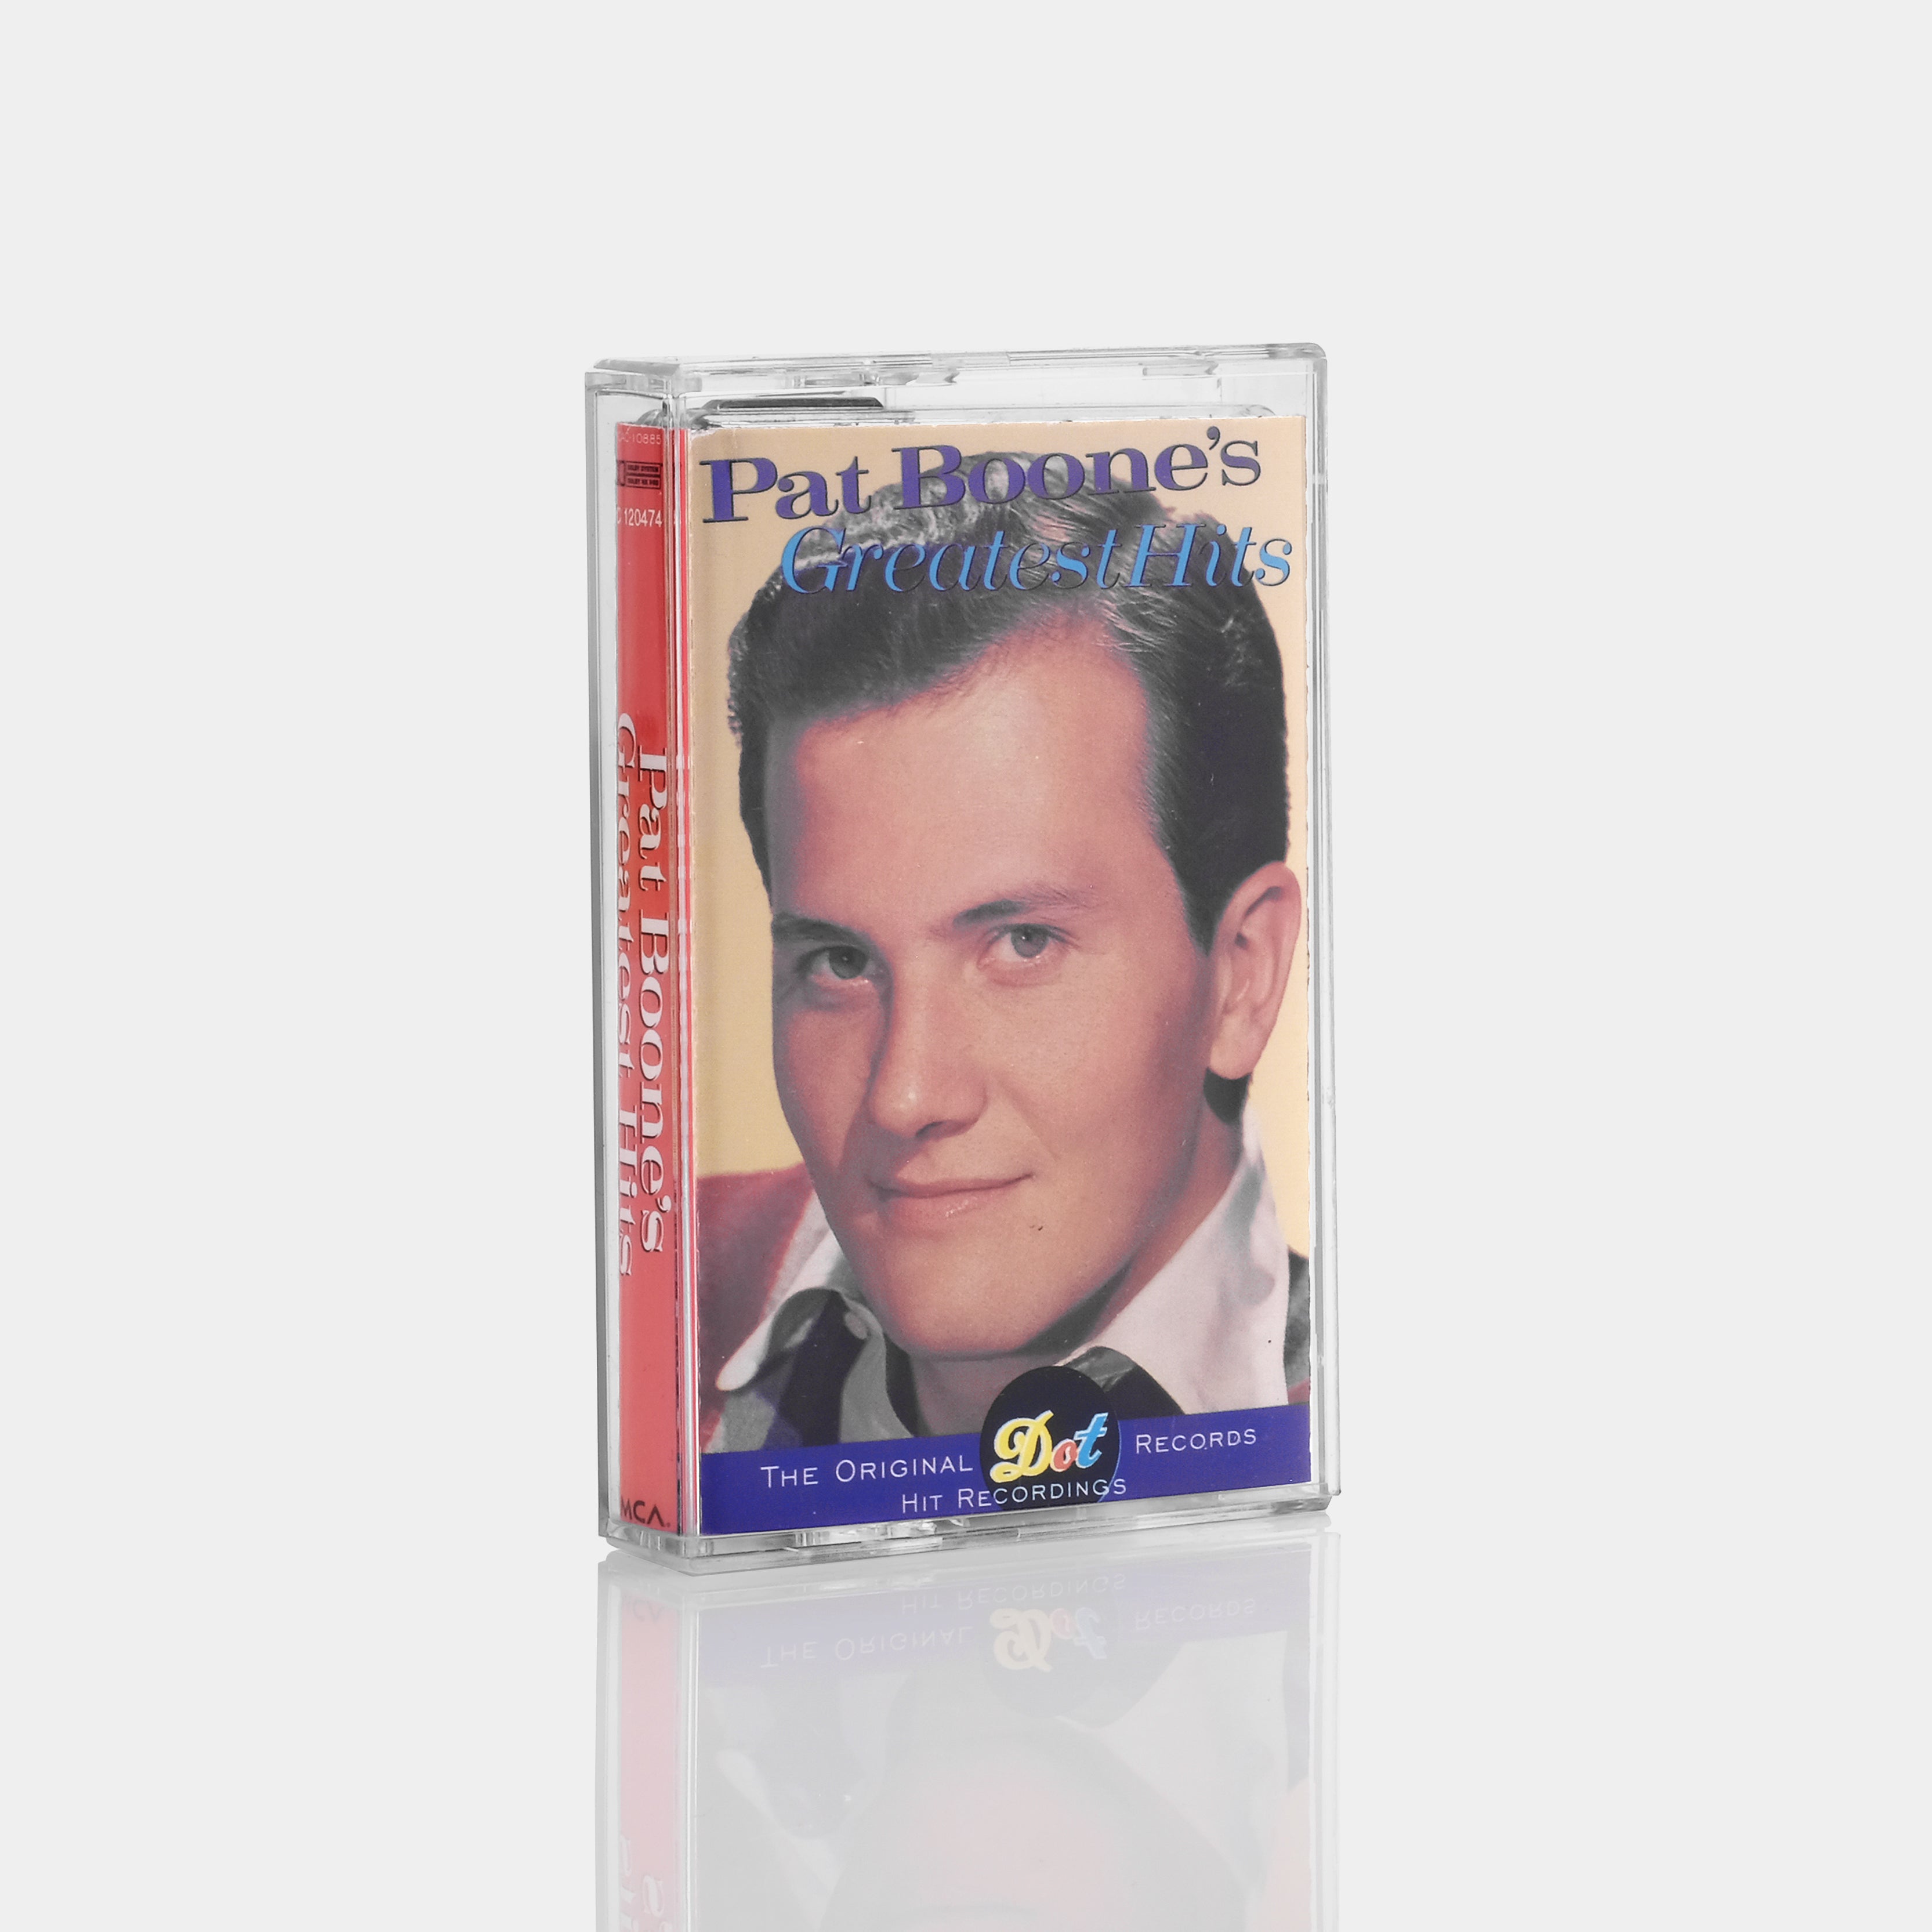 Pat Boone - Pat Boone's Greatest Hits Cassette Tape